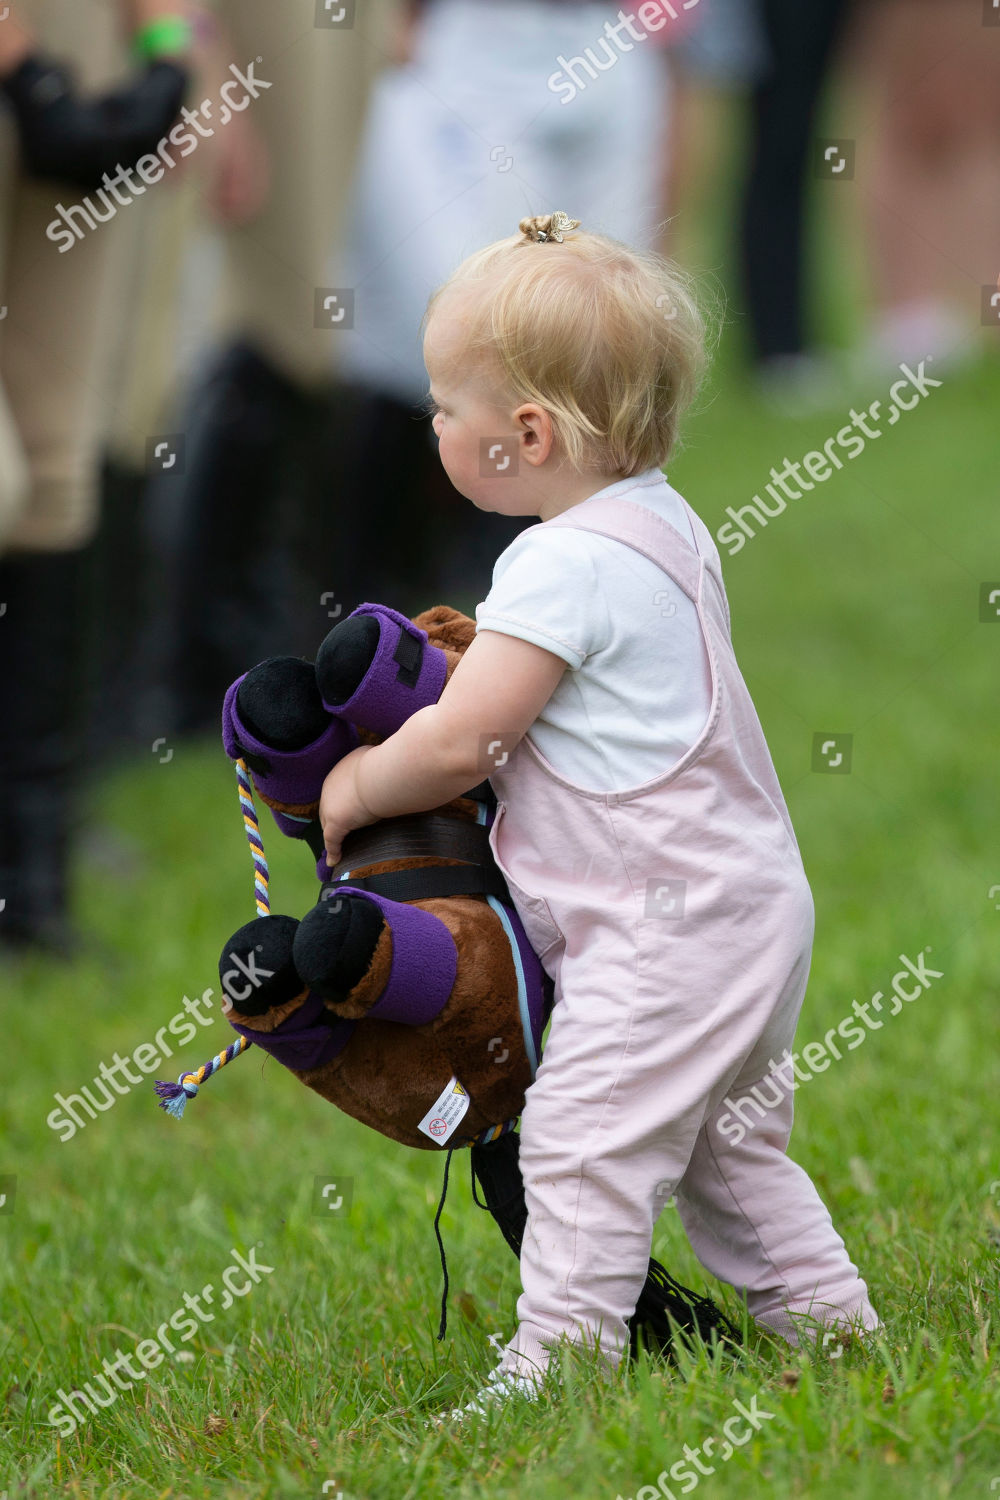 festival-of-british-eventing-day2-gatcombe-gloucestershire-uk-shutterstock-editorial-10353523aw.jpg